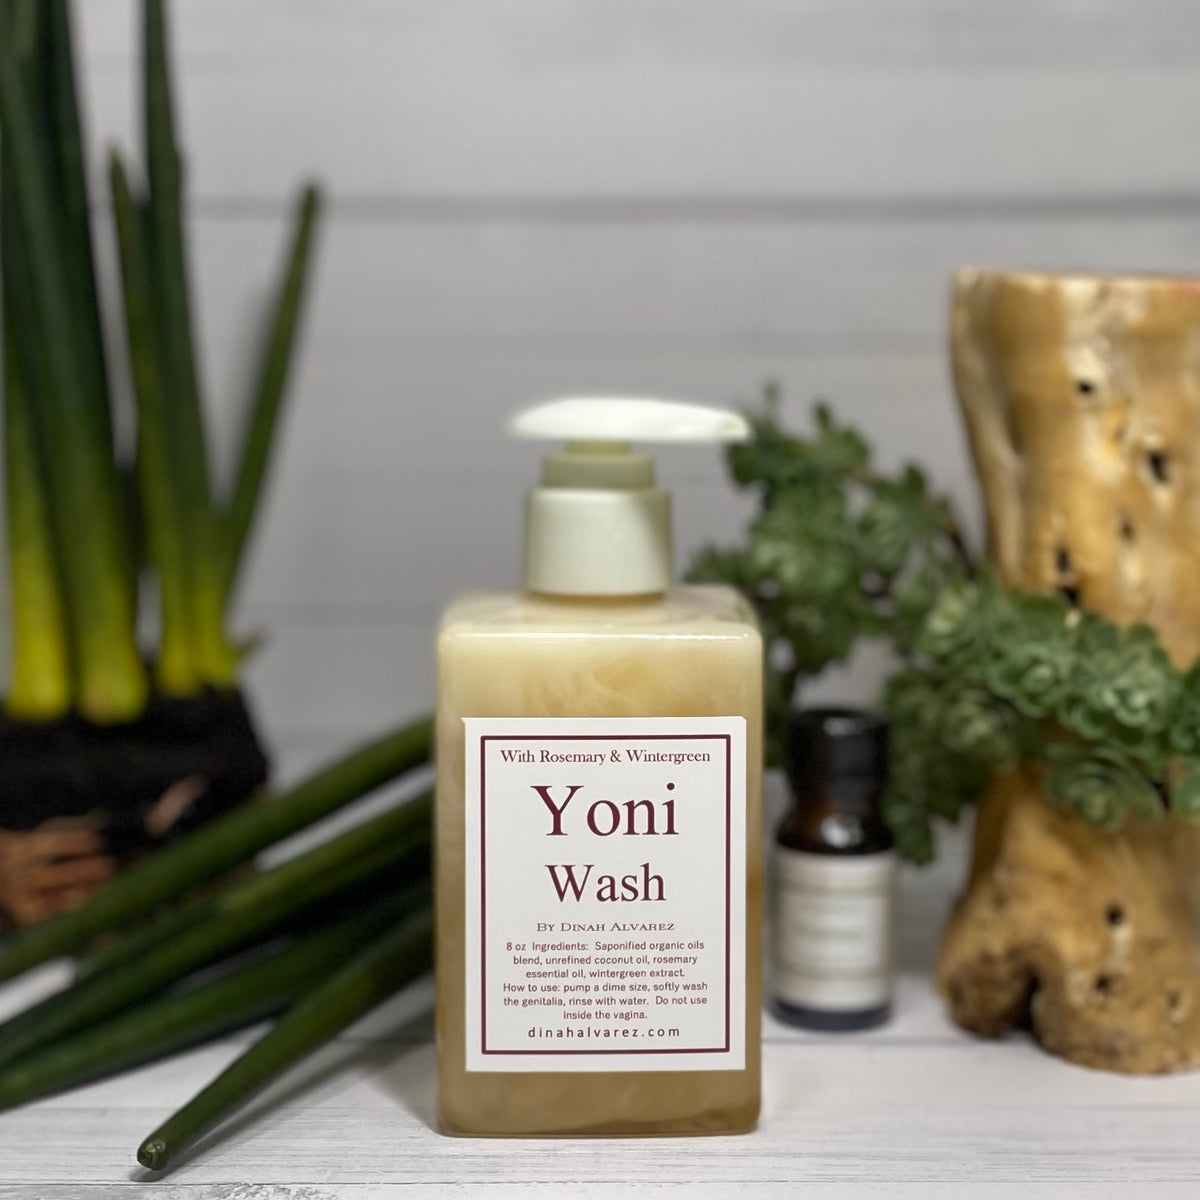 Yoni Wash with Rosemary & Wintergreen Oils